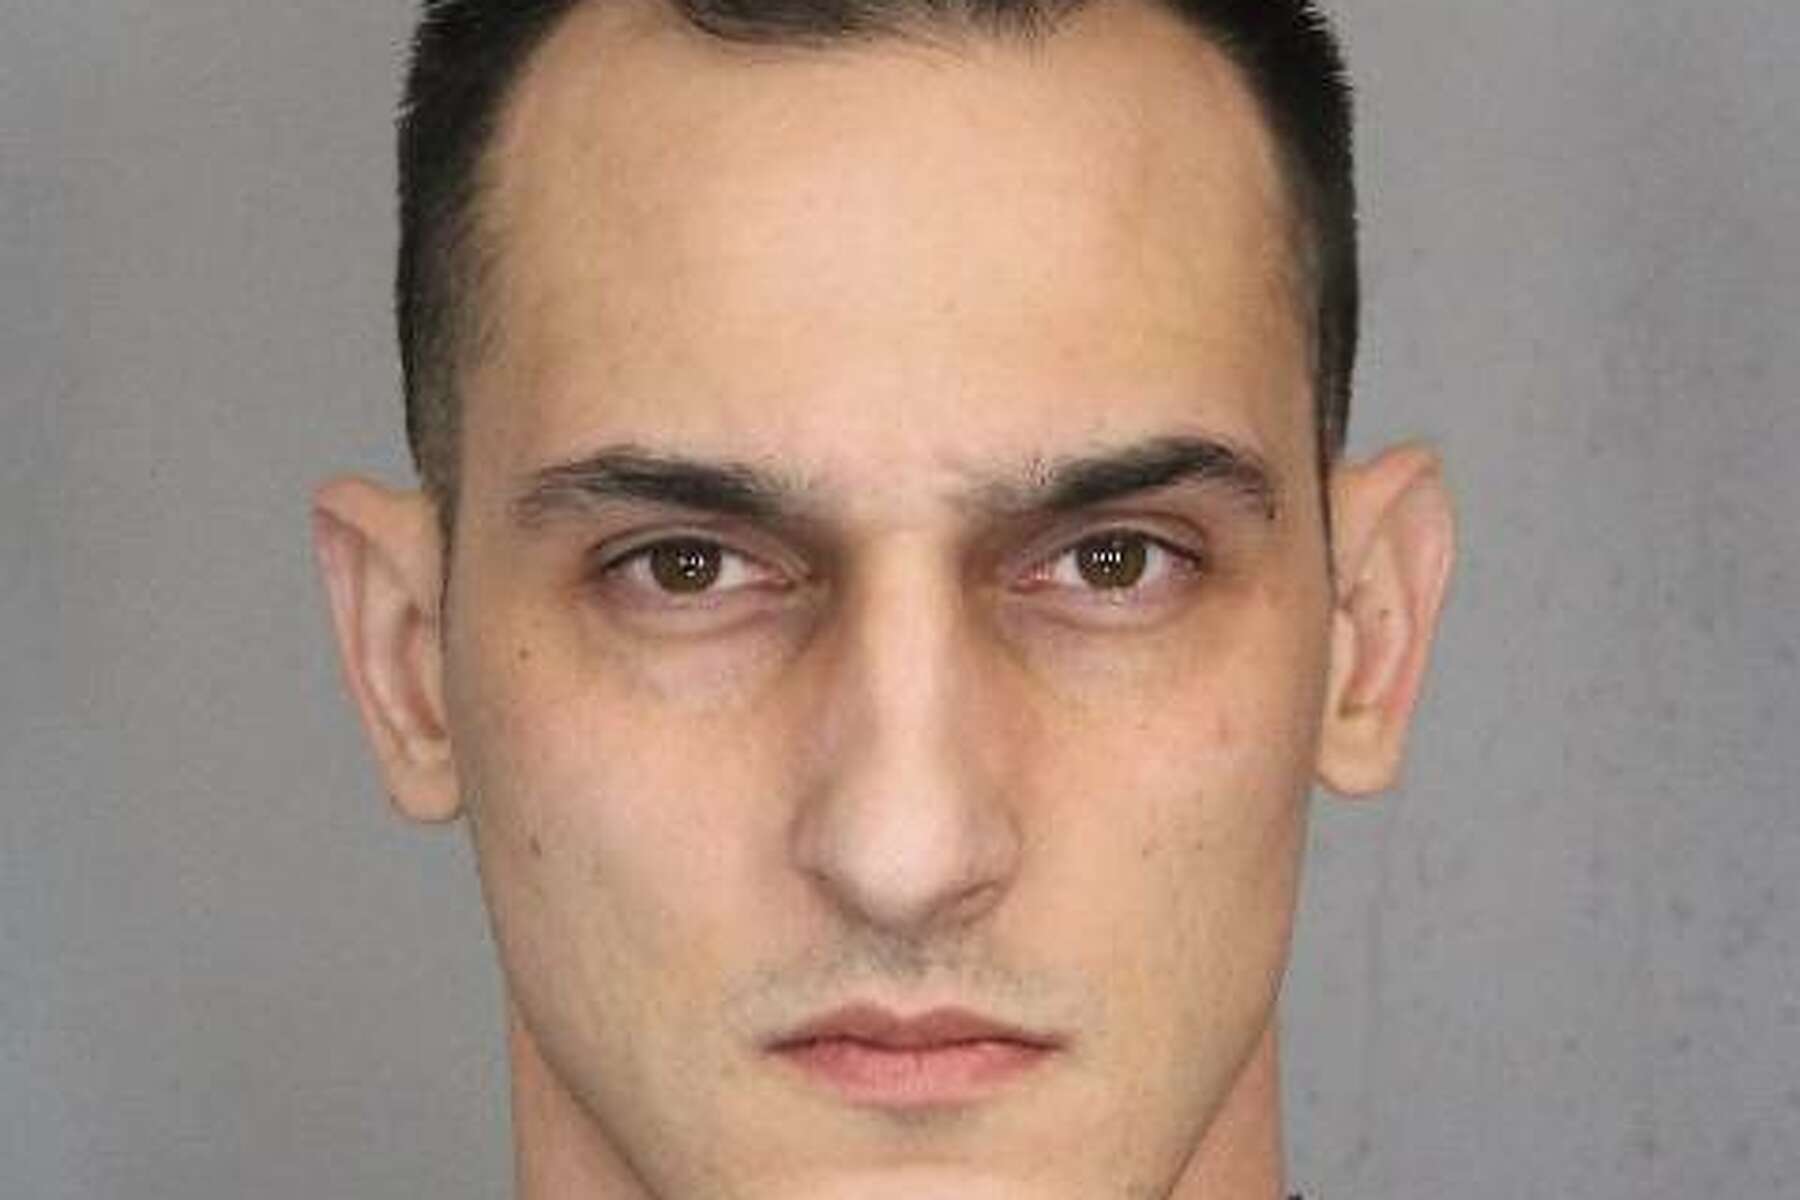 Sharking Street Rape Nude Girl - Albany cop in Utica shooting resigns, pleads to DWAI charge